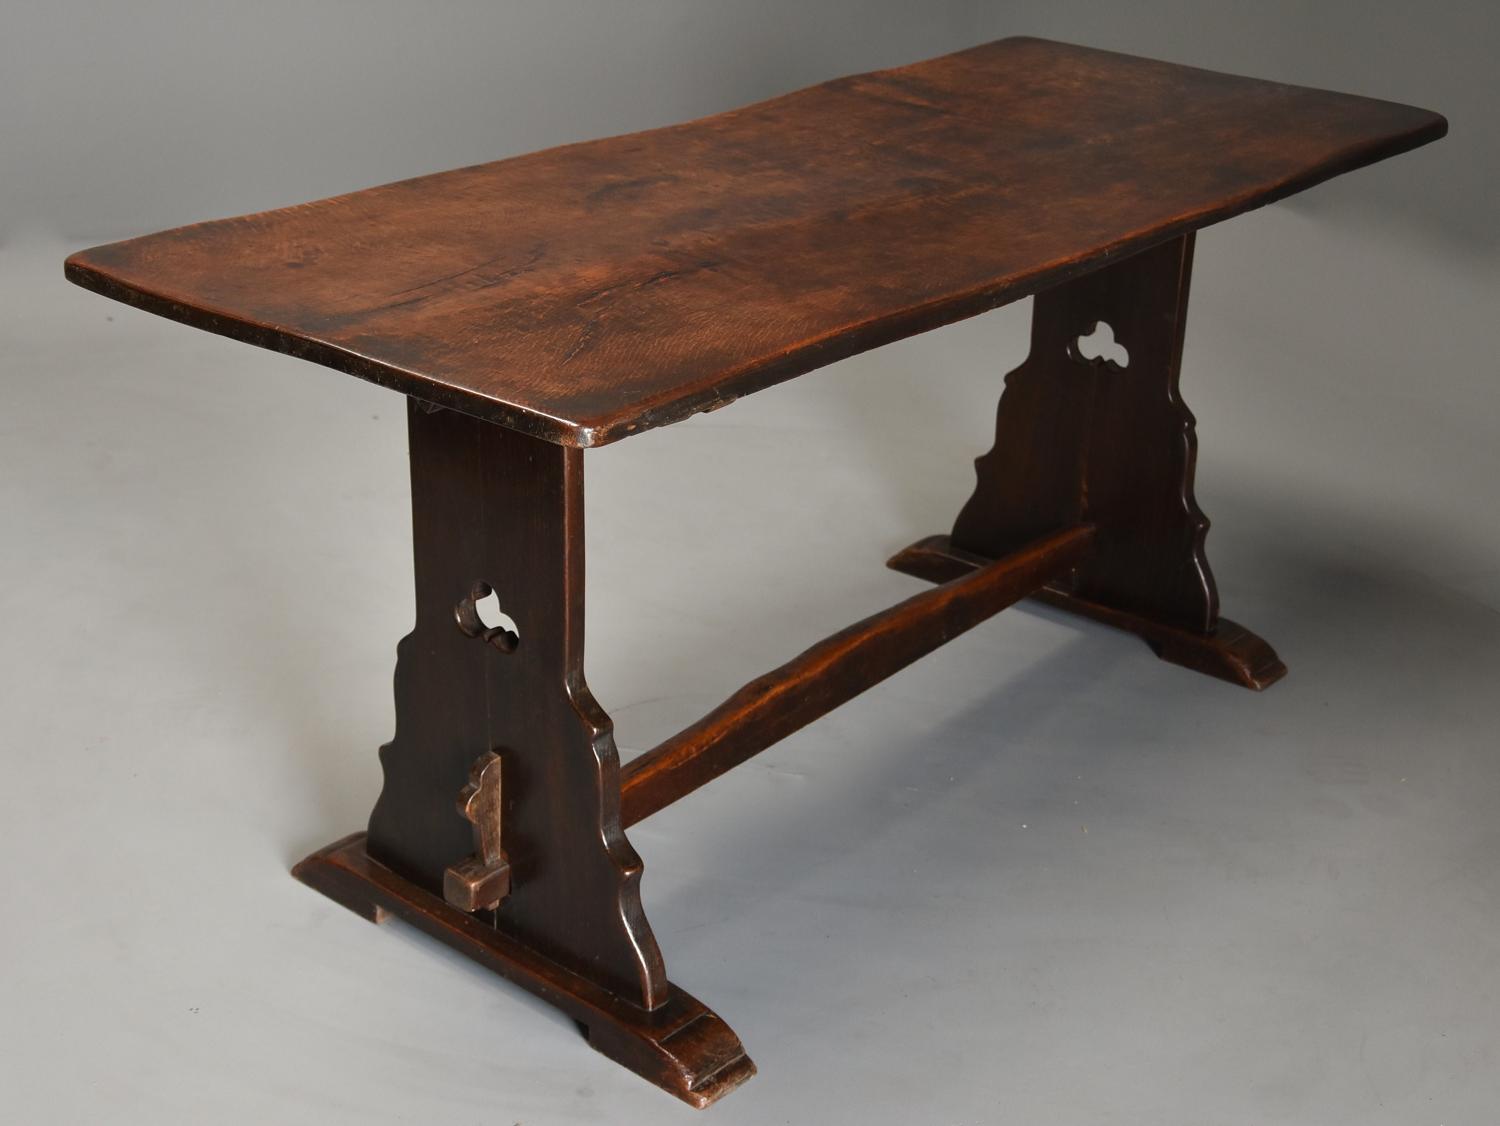 Early 20thc Arts & Crafts oak pegged trestle table with superb patina